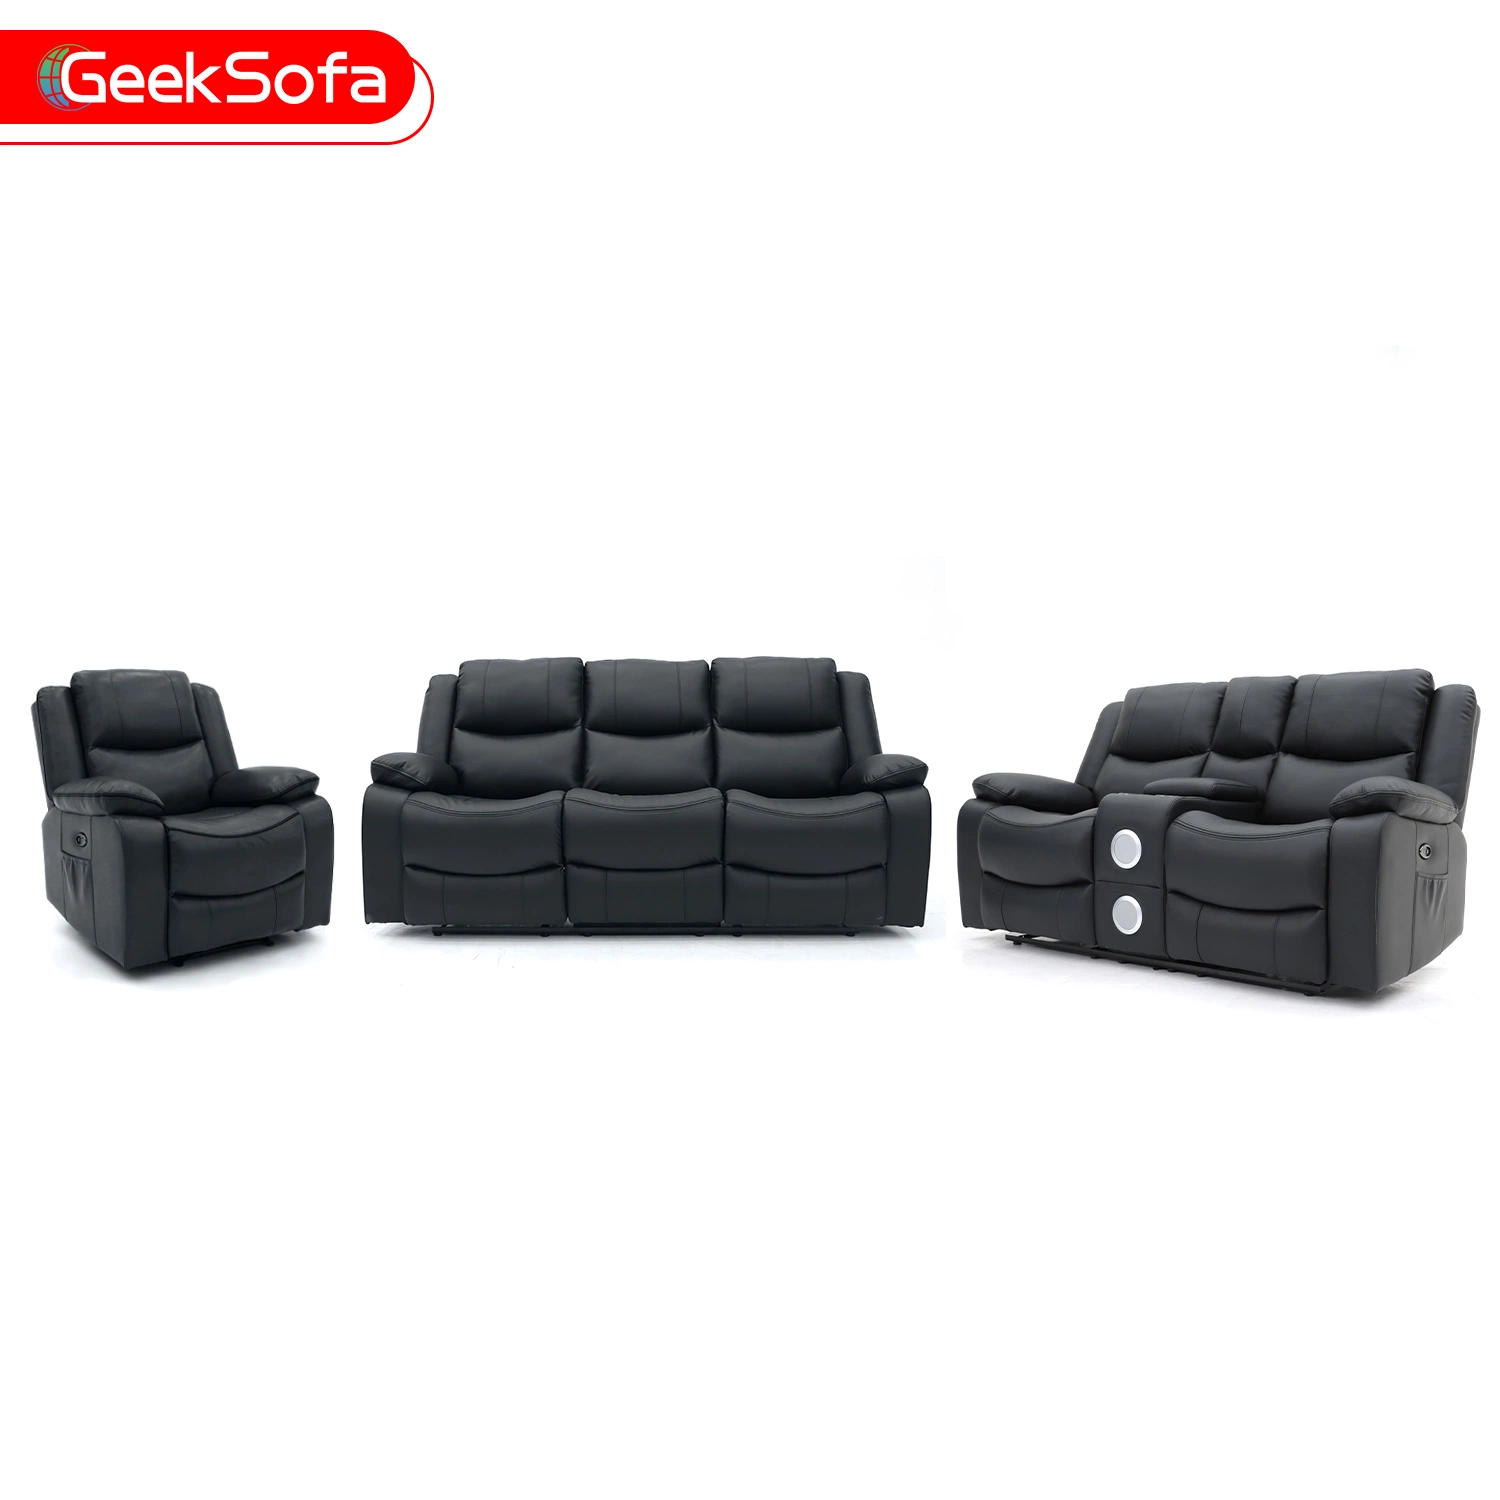 Geeksofa 3+2+1 Modern Leather Motion Recliner Sofa Set with Massage and Cup Holder for Living Room Furniture